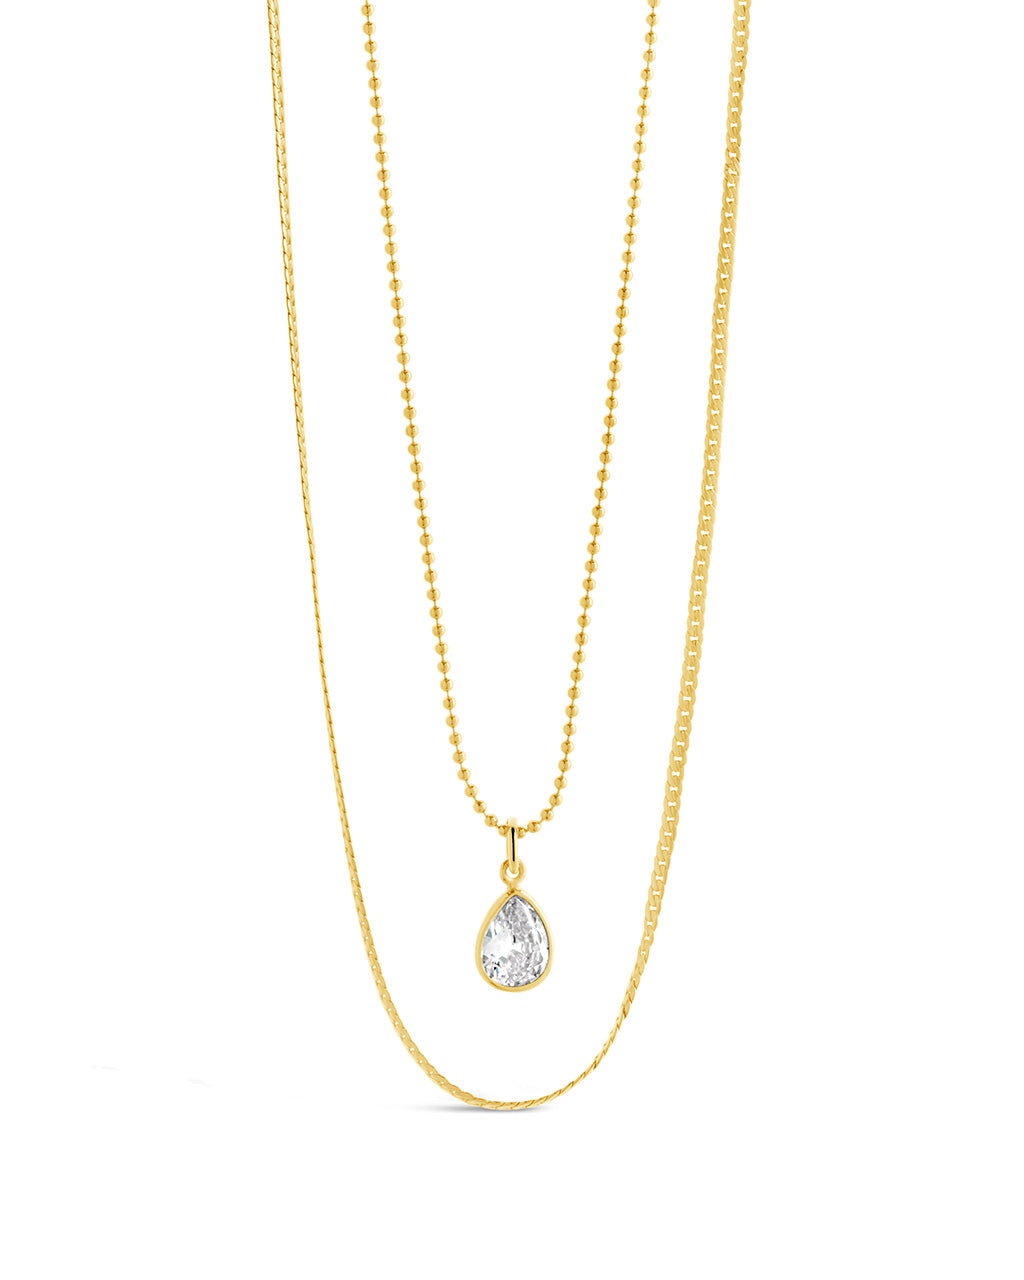 Phoebe CZ Layered Necklace Necklace Sterling Forever Gold 